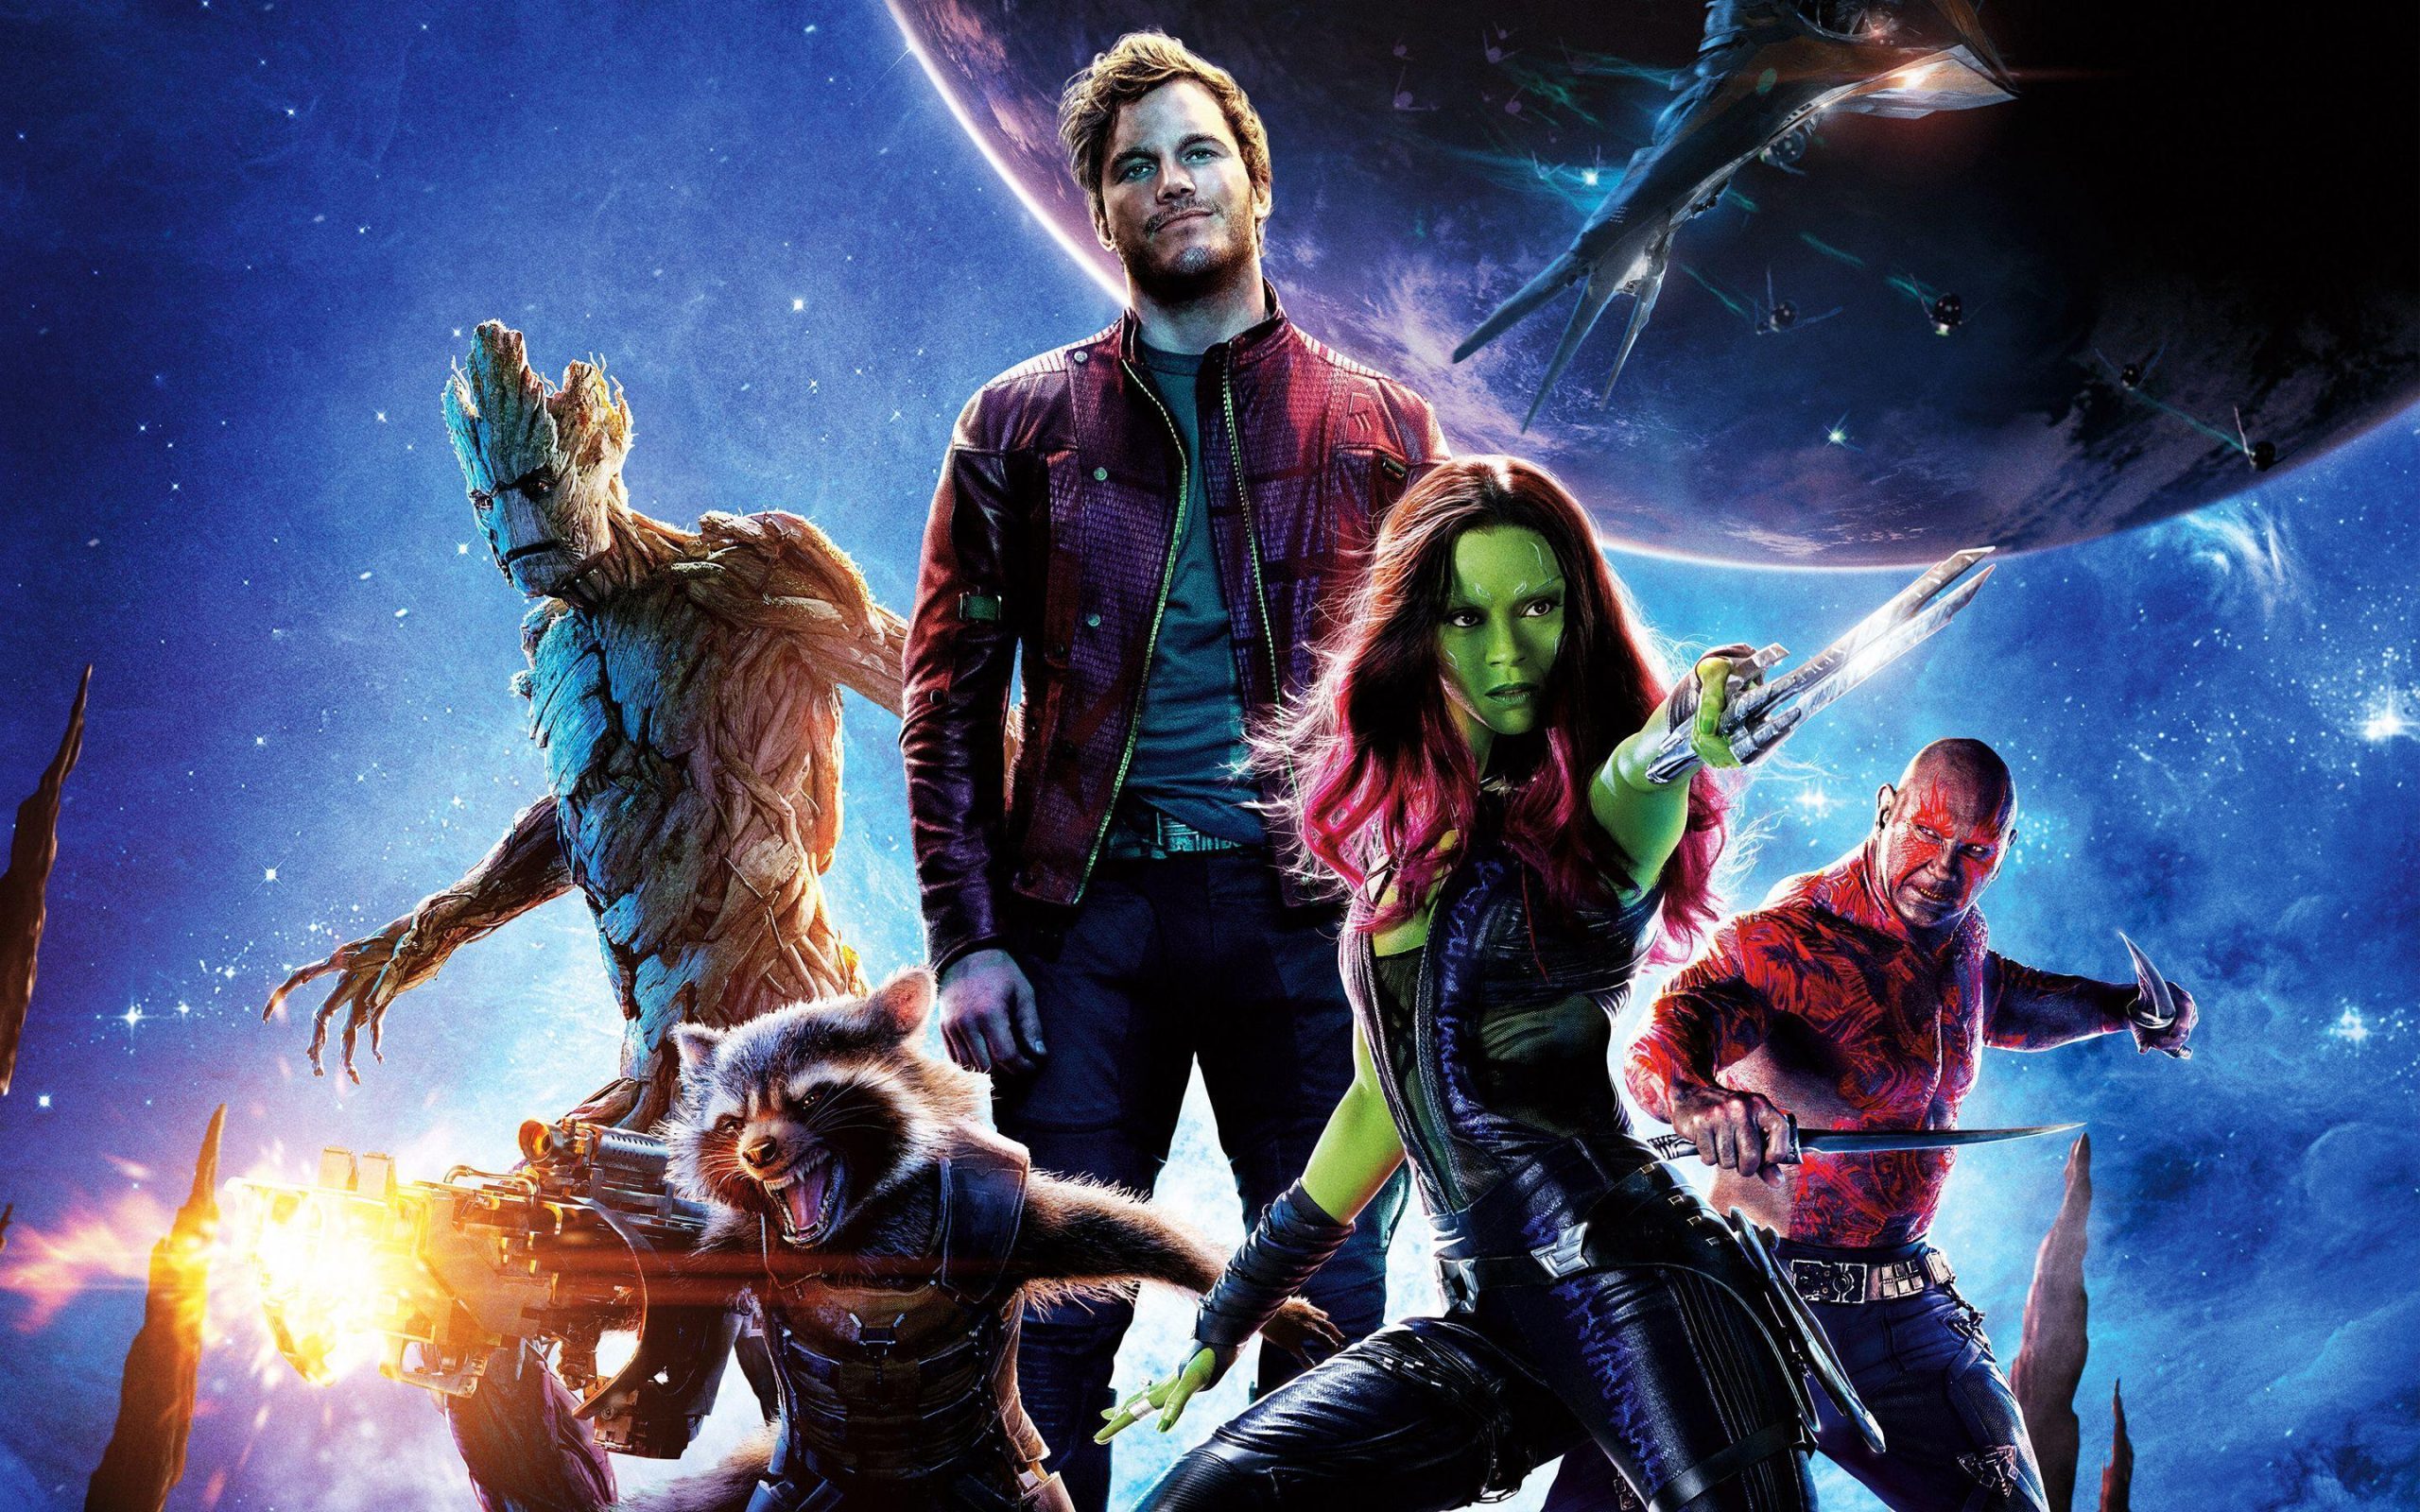 The Guardians Of The Galaxy Wallpapers For Free, The Guardians Of The Galaxy, Movies